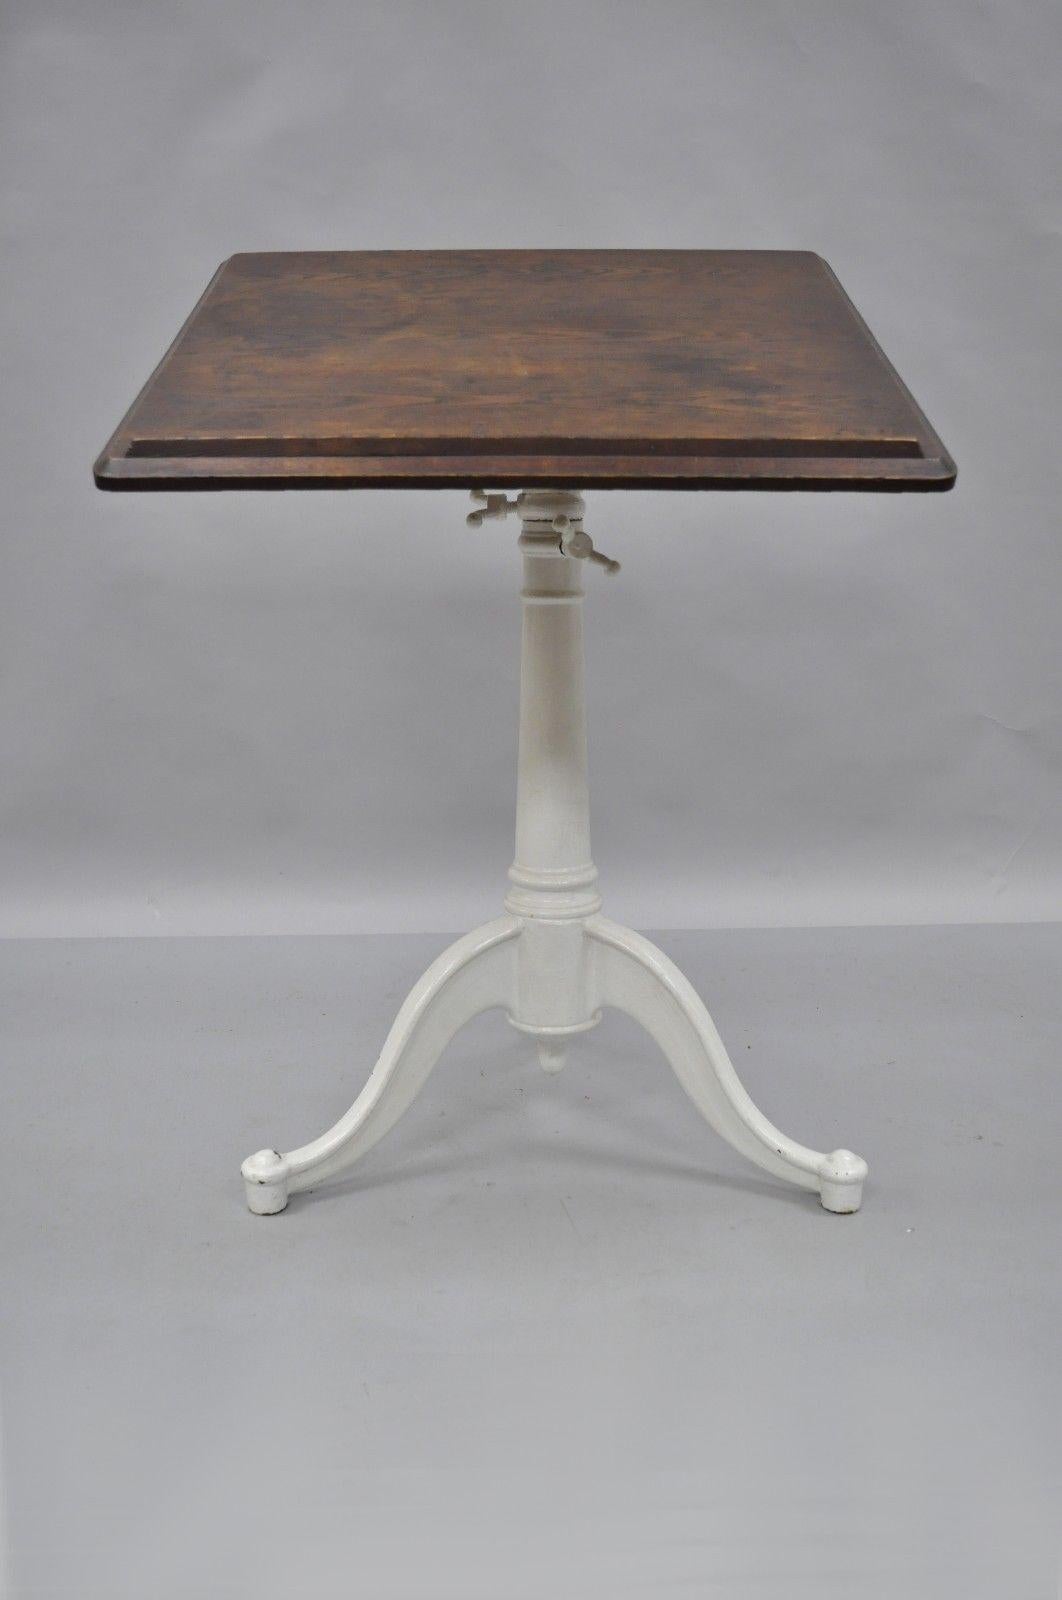 Antique cast iron and wood small drafting work table by Eugene Dietzgen. Item features cast iron tripod base, solid wood top, original tag, adjustable height and tilt, quality American craftsmanship. Later added white painted finish to base, circa